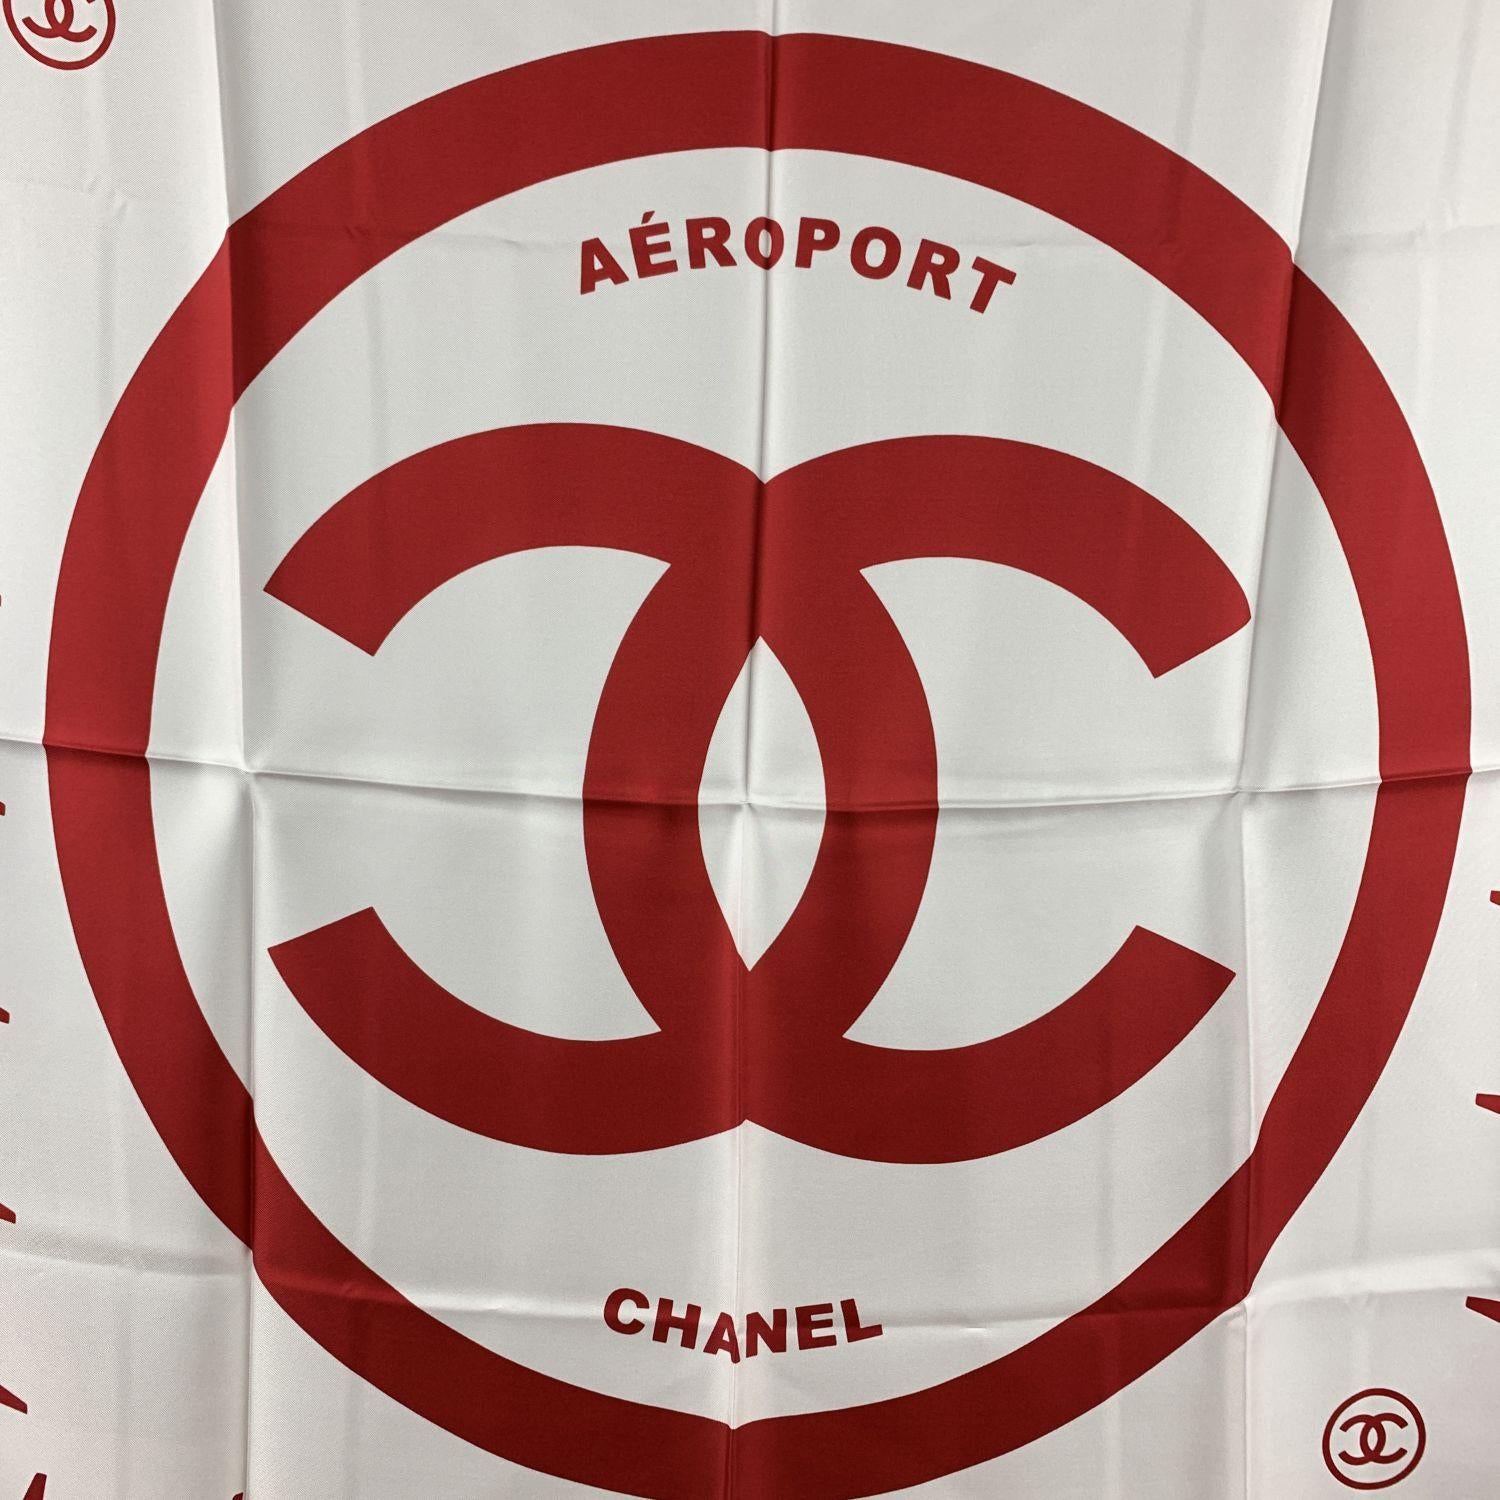 Chanel 'Aeroport' silk scarf in red and white colors from the 2016 Airline collection. Contrast dark borders. Big Chanel CC logo in the center, surrounded by red and white airplanes. Rolled edges. Composition: 100% Silk. Measurements: 36 x 36 inches